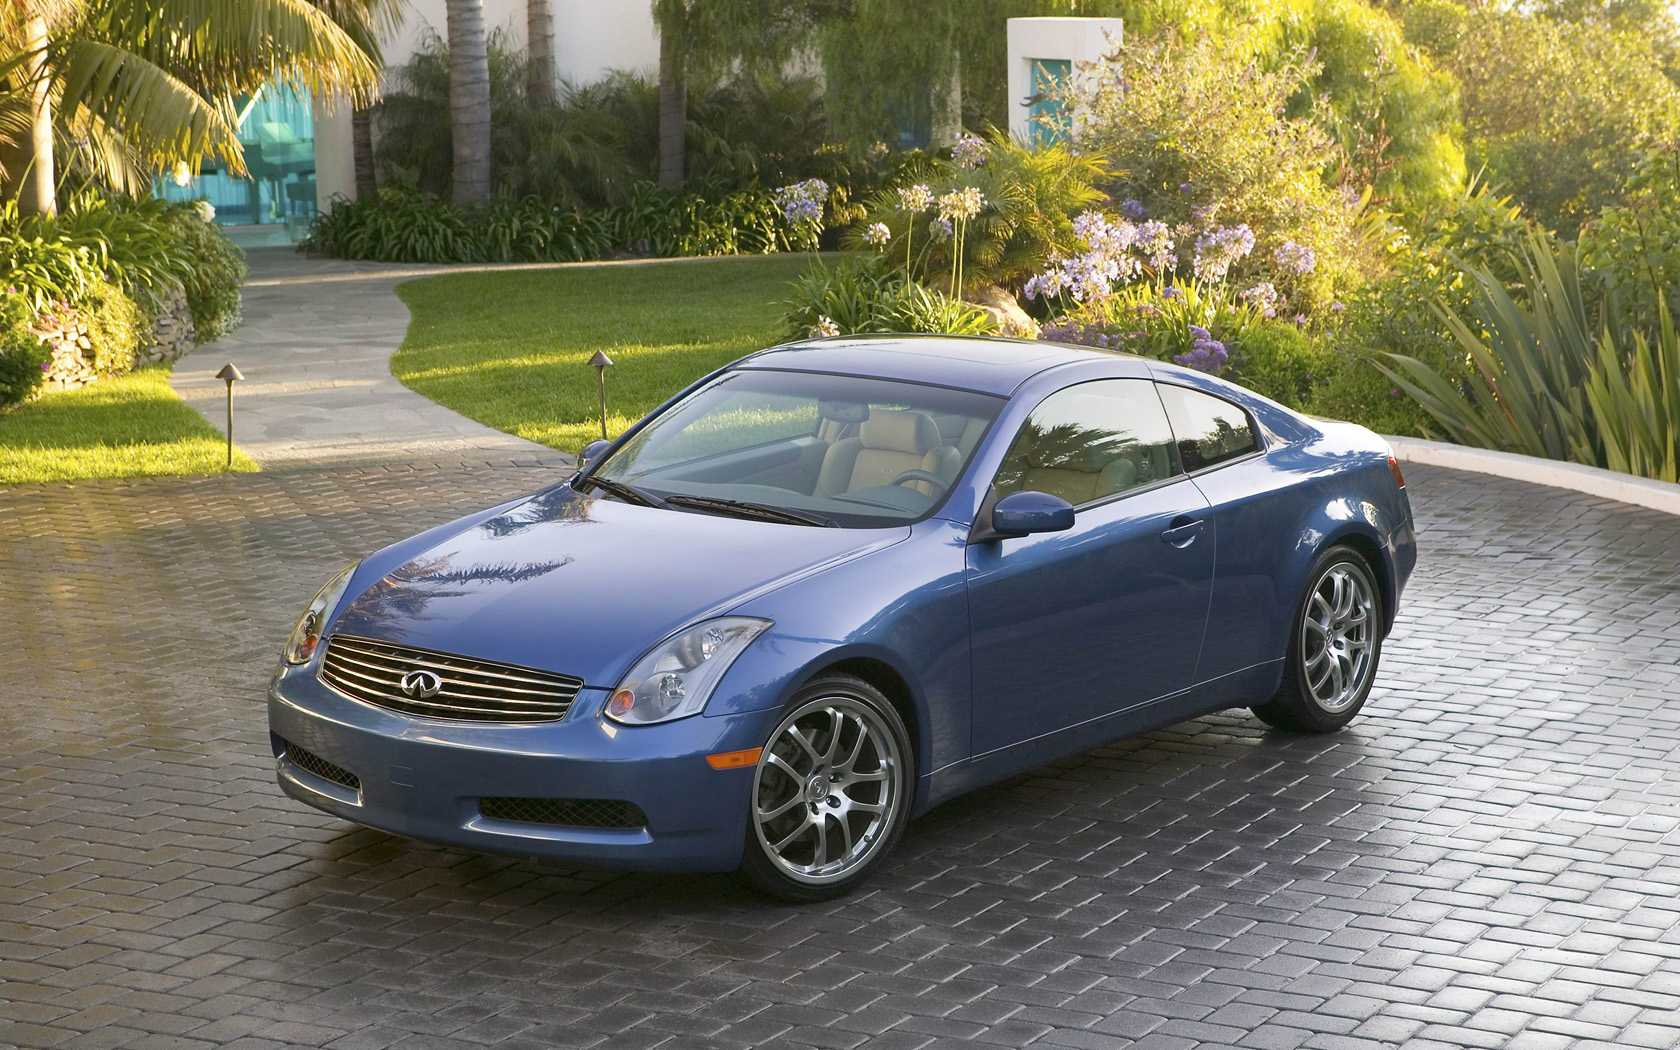 Tested: 2003 infiniti g35 coupe